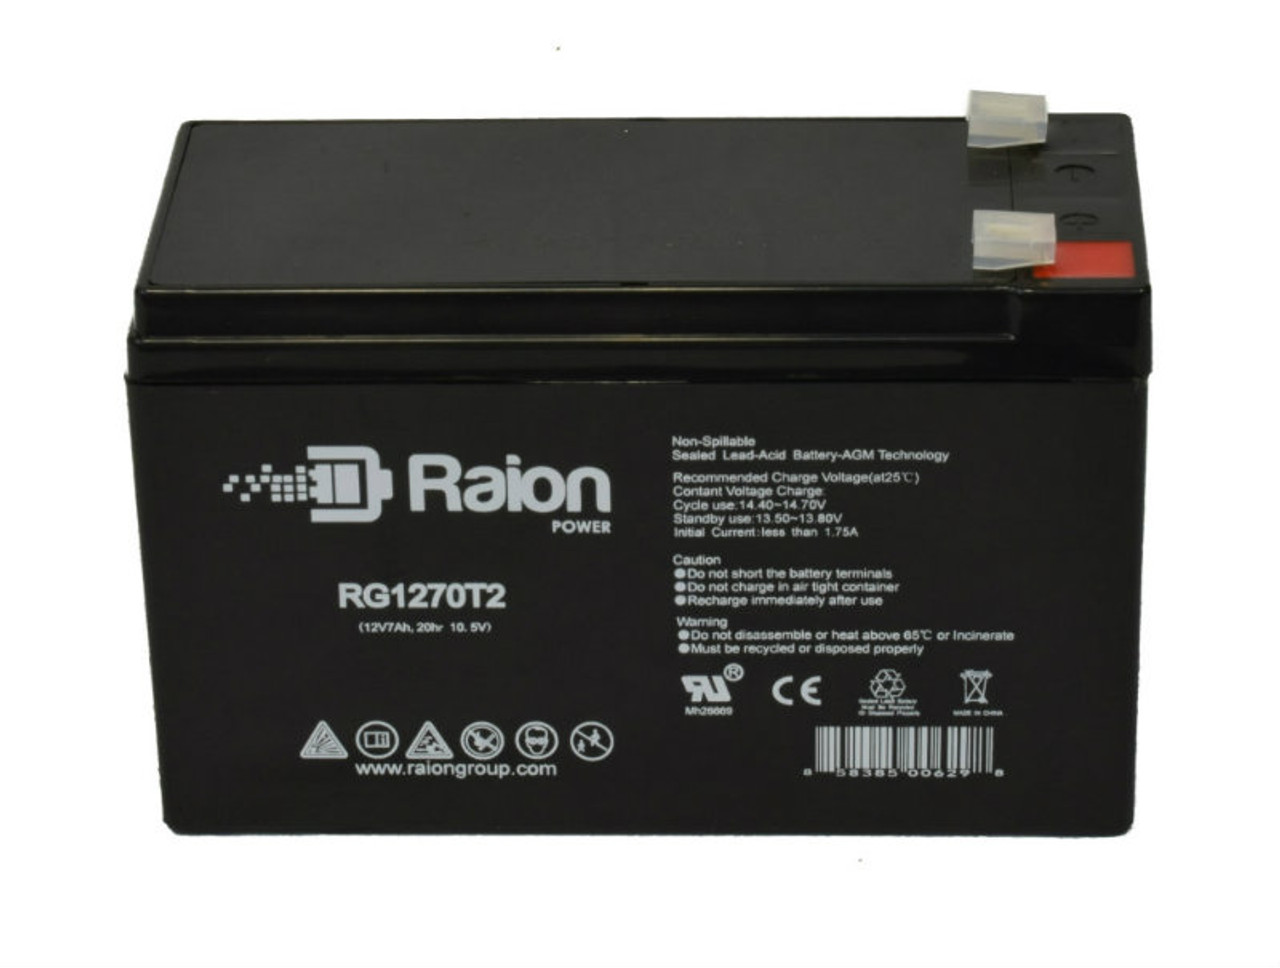 Raion Power RG1270T2 12V 7Ah Lead Acid Battery for Razor 13112410 E200 Electric-Powered Scooter White/Red